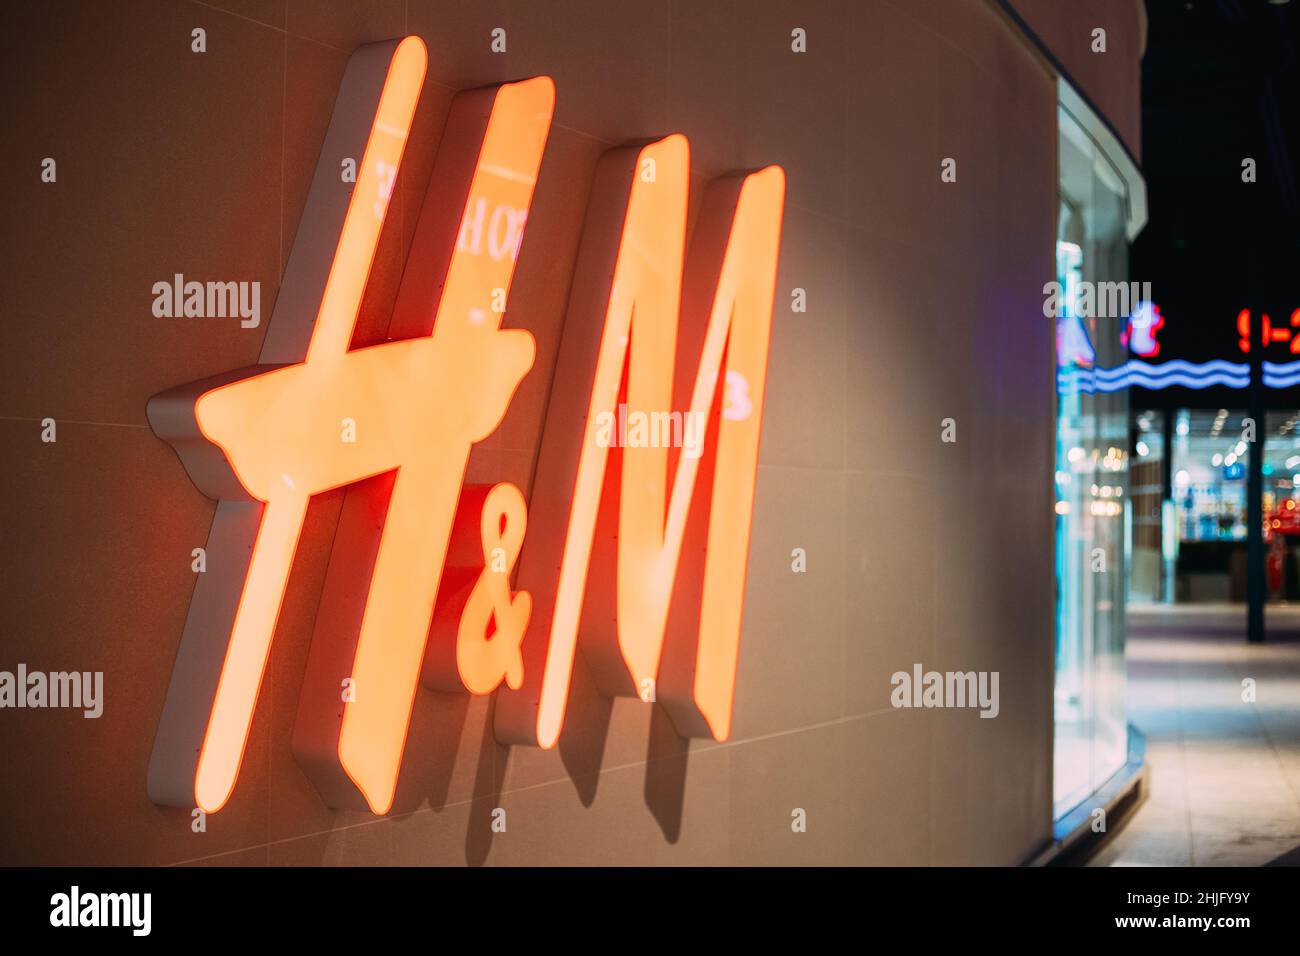 Close Red Logotype H&M Of Hennes & Mauritz Brand At Wall Of Store In Shopping Center. Stock Photo